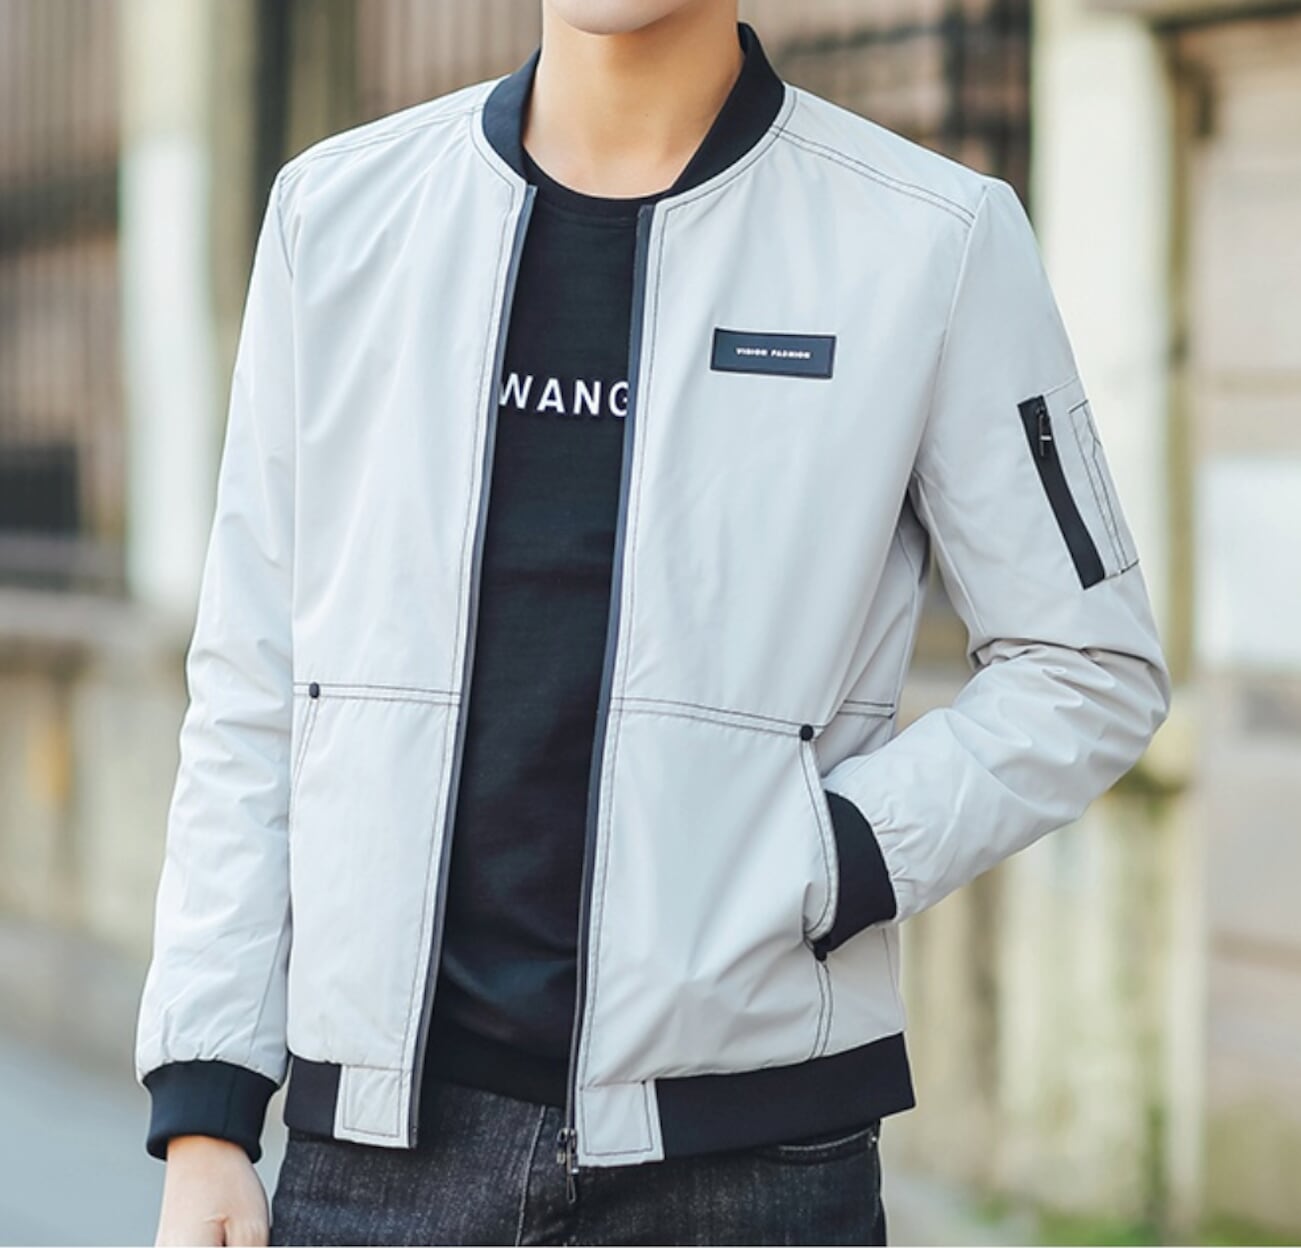 Mens Bomber Jacket with Stitching Designs